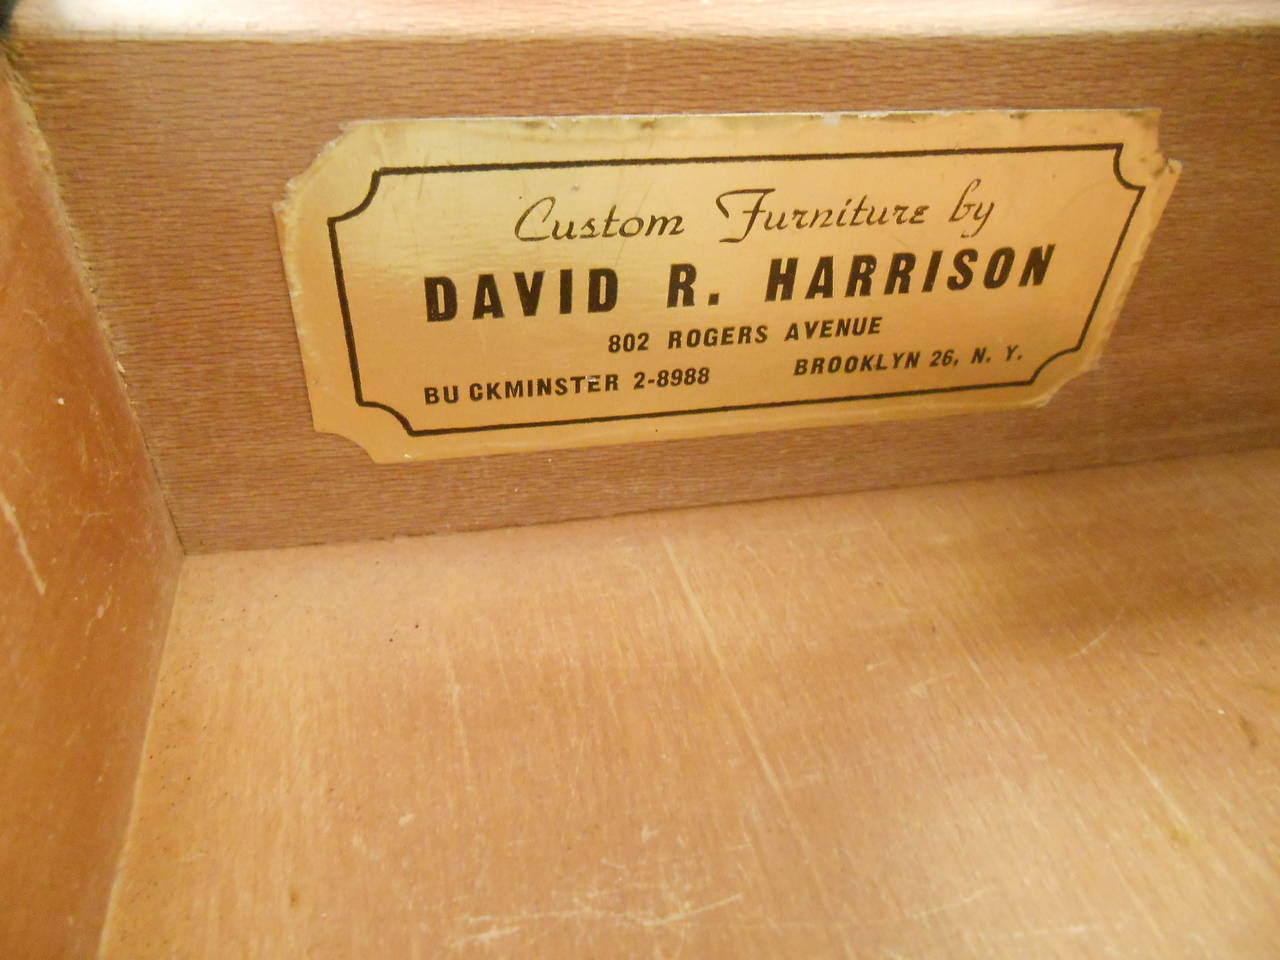 American Pair of Gold and Black NightStands by David R. Harrison